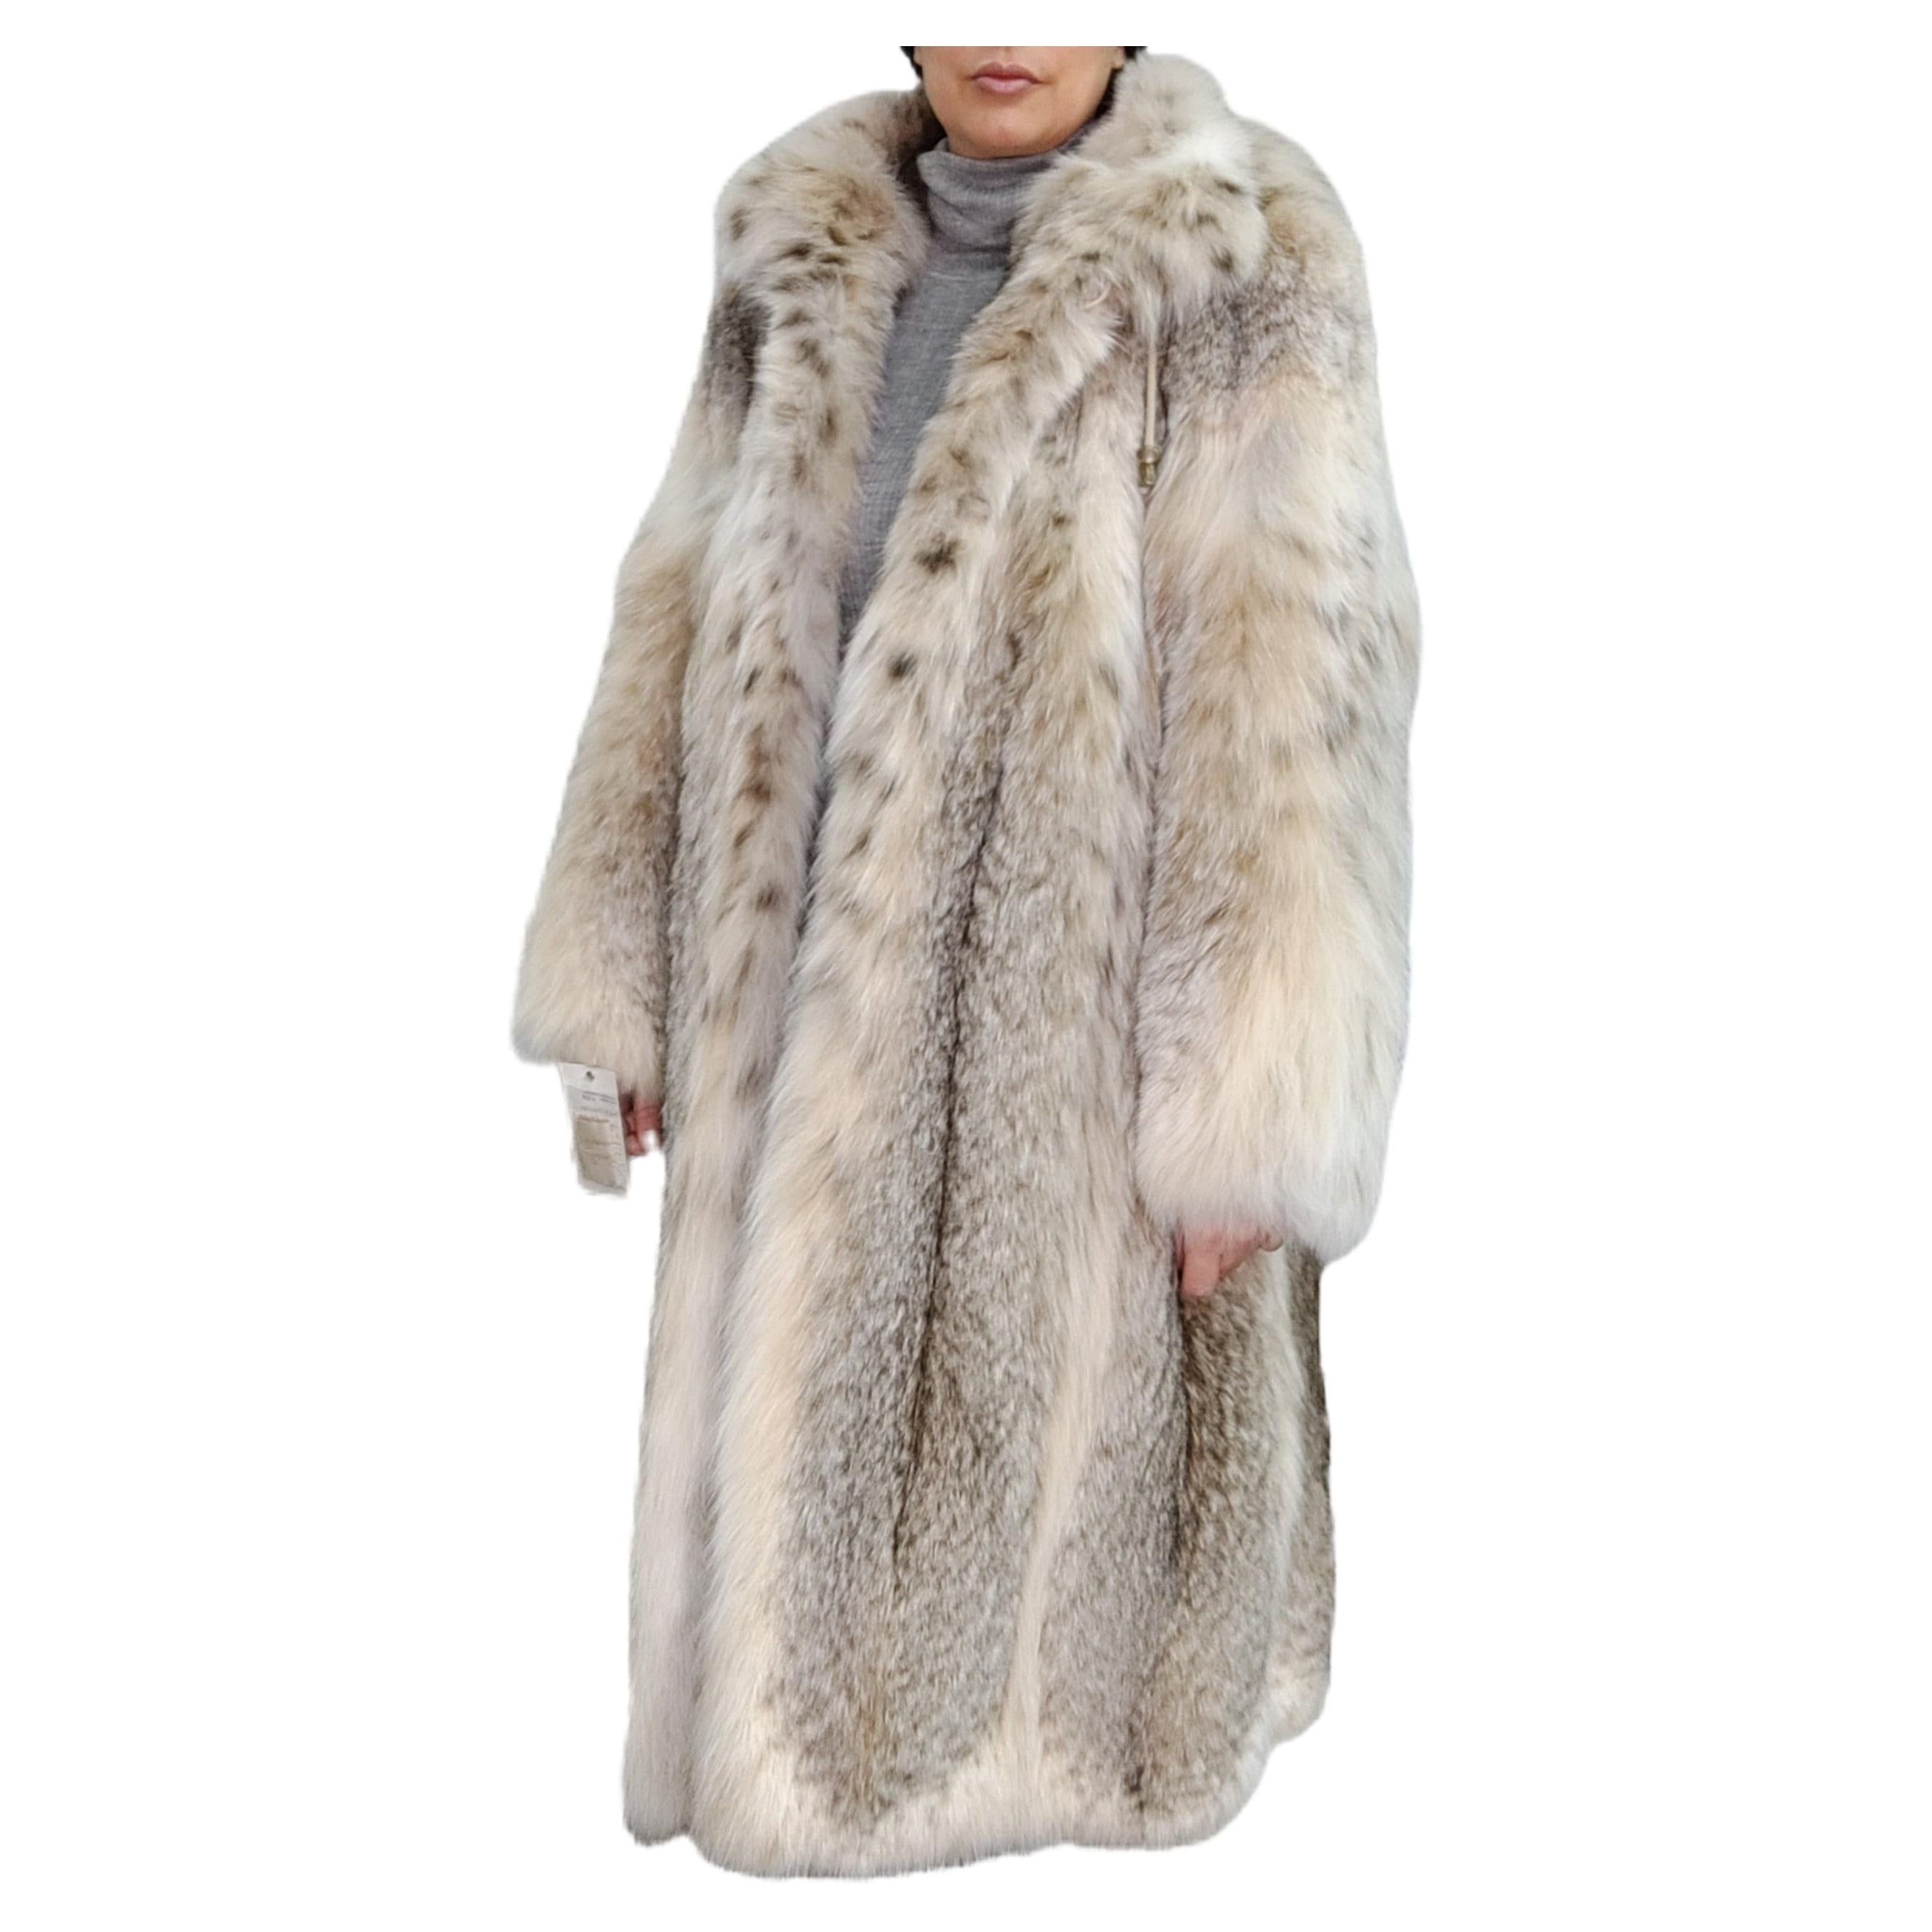 Brand new lightweight lynx fur coat with detachable hood size 24 XXL For Sale